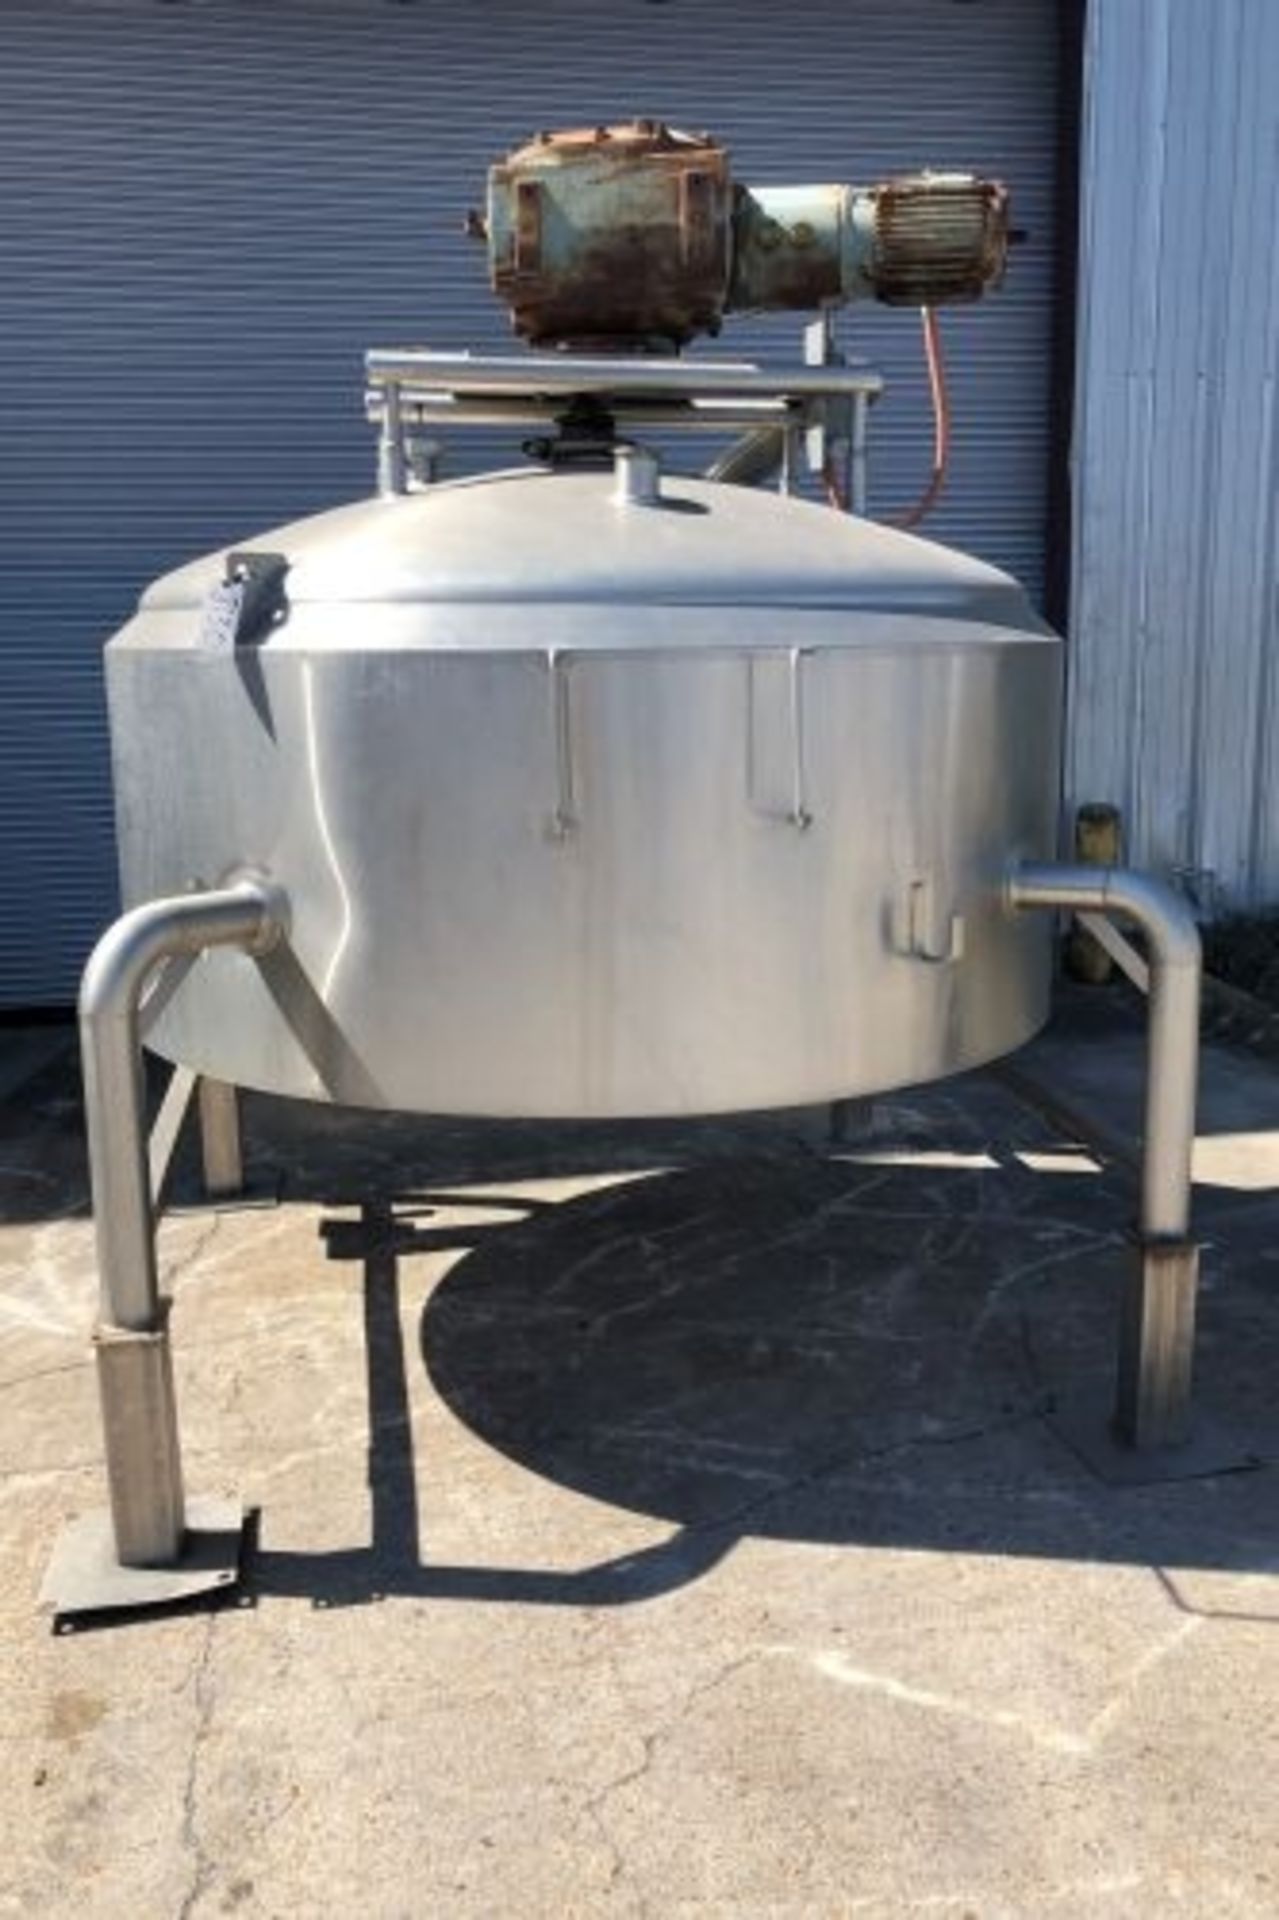 250 gallon Cherry-Burrell Int stainless steel scrape surface insulated tank - Image 2 of 6